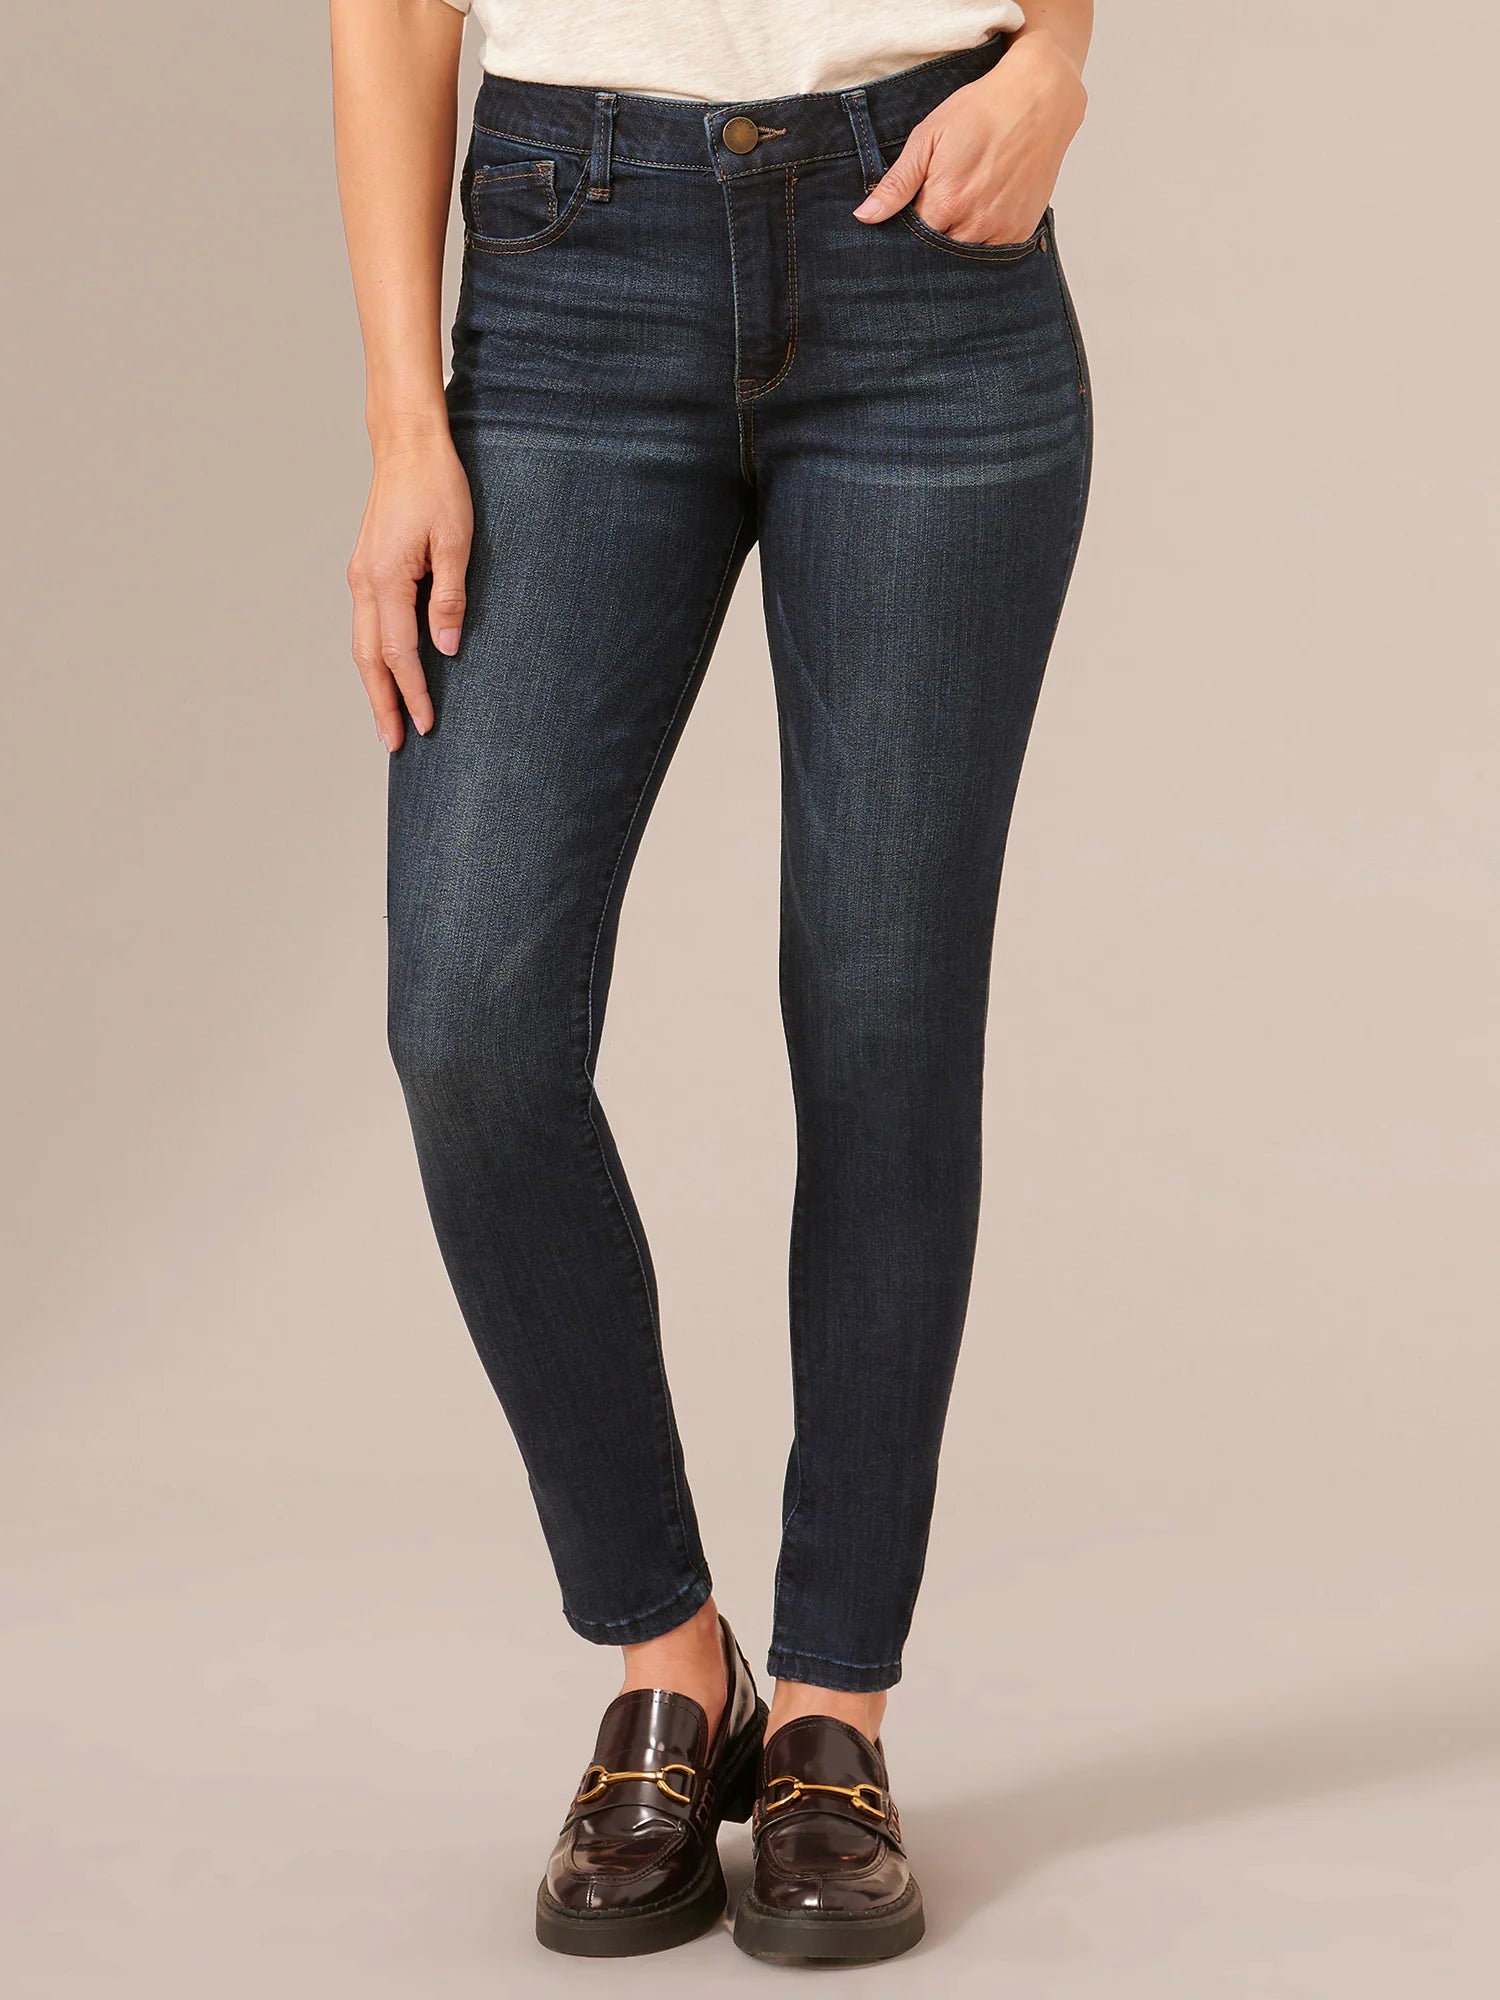 "Ab"solution® Modern High Rise Ankle Length Petite Skinny Jeans Spring-Summer JOOR - Democracy